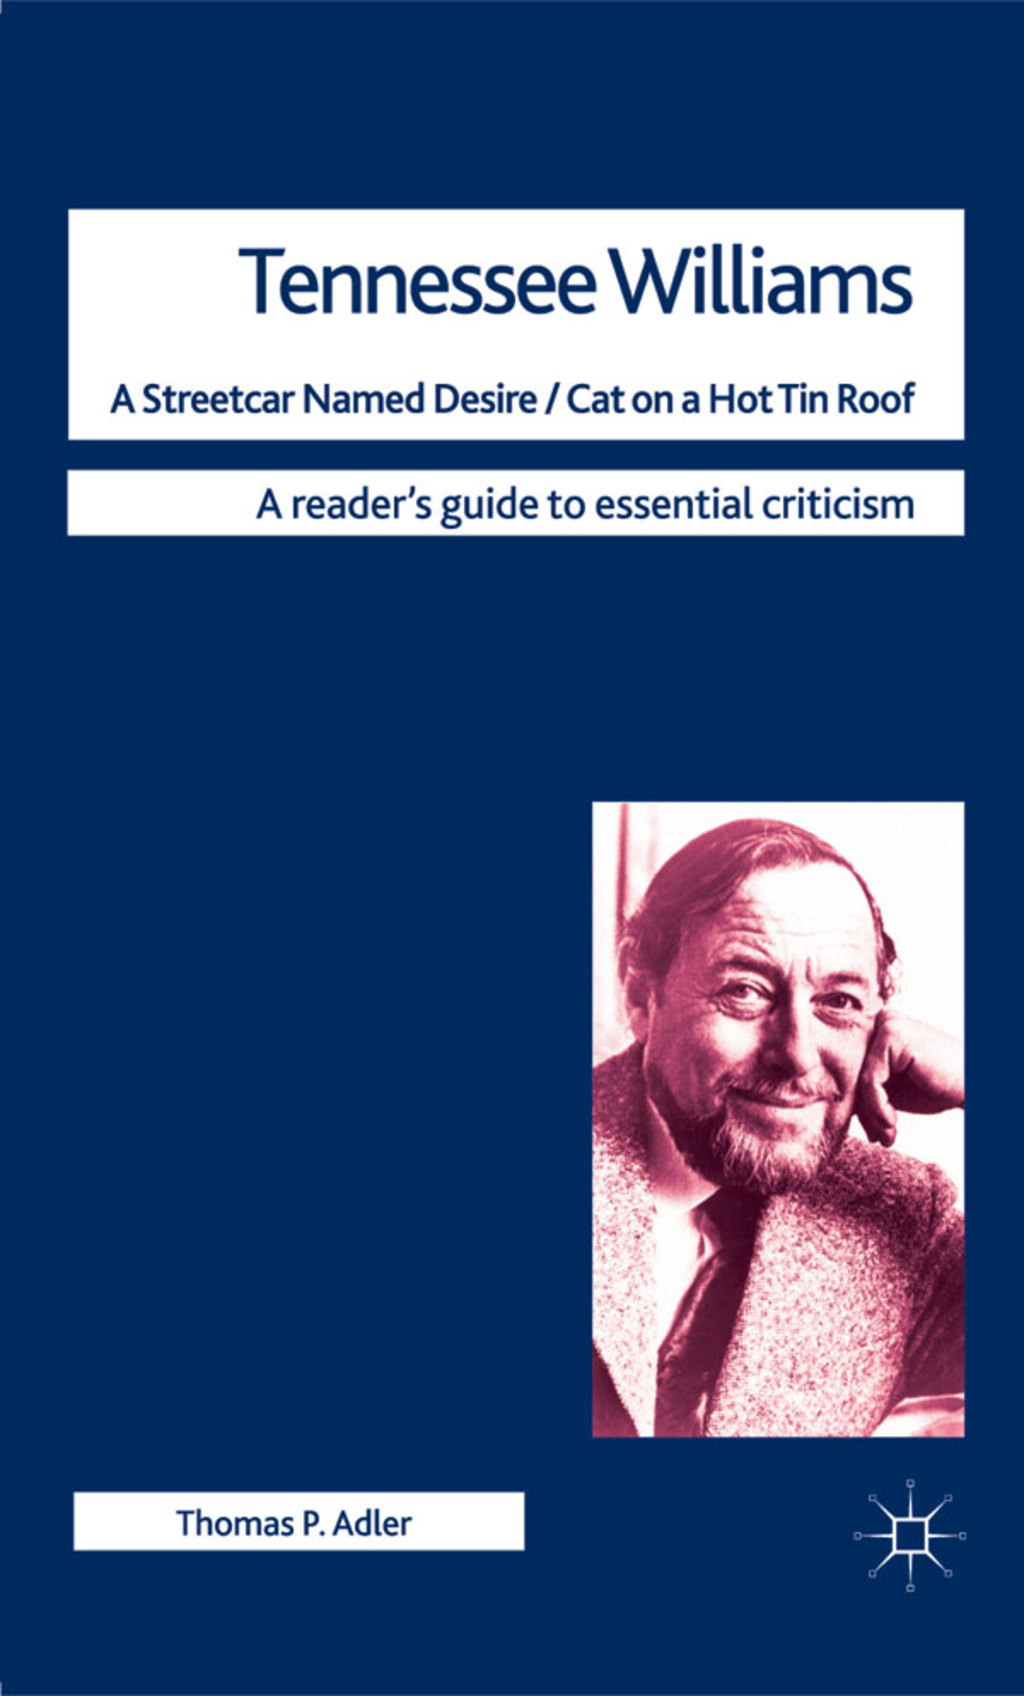 Tennessee Williams - A Streetcar Named Desire/Cat on a Hot Tin Roof (eBook) - Thomas P. Adler,